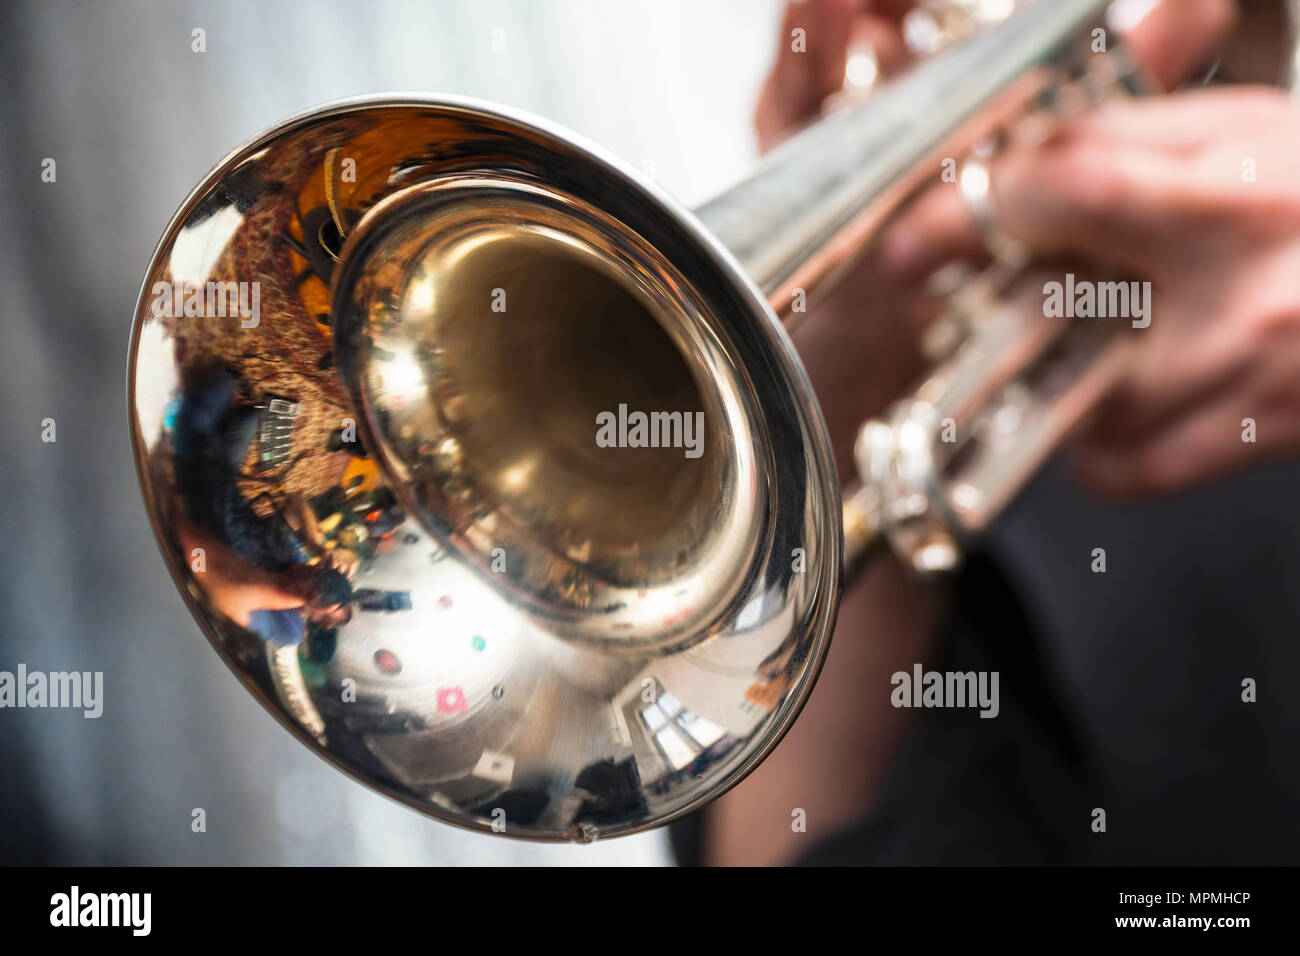 The trumpeter is playing on a silver trumpet. Trumpet player Stock ...